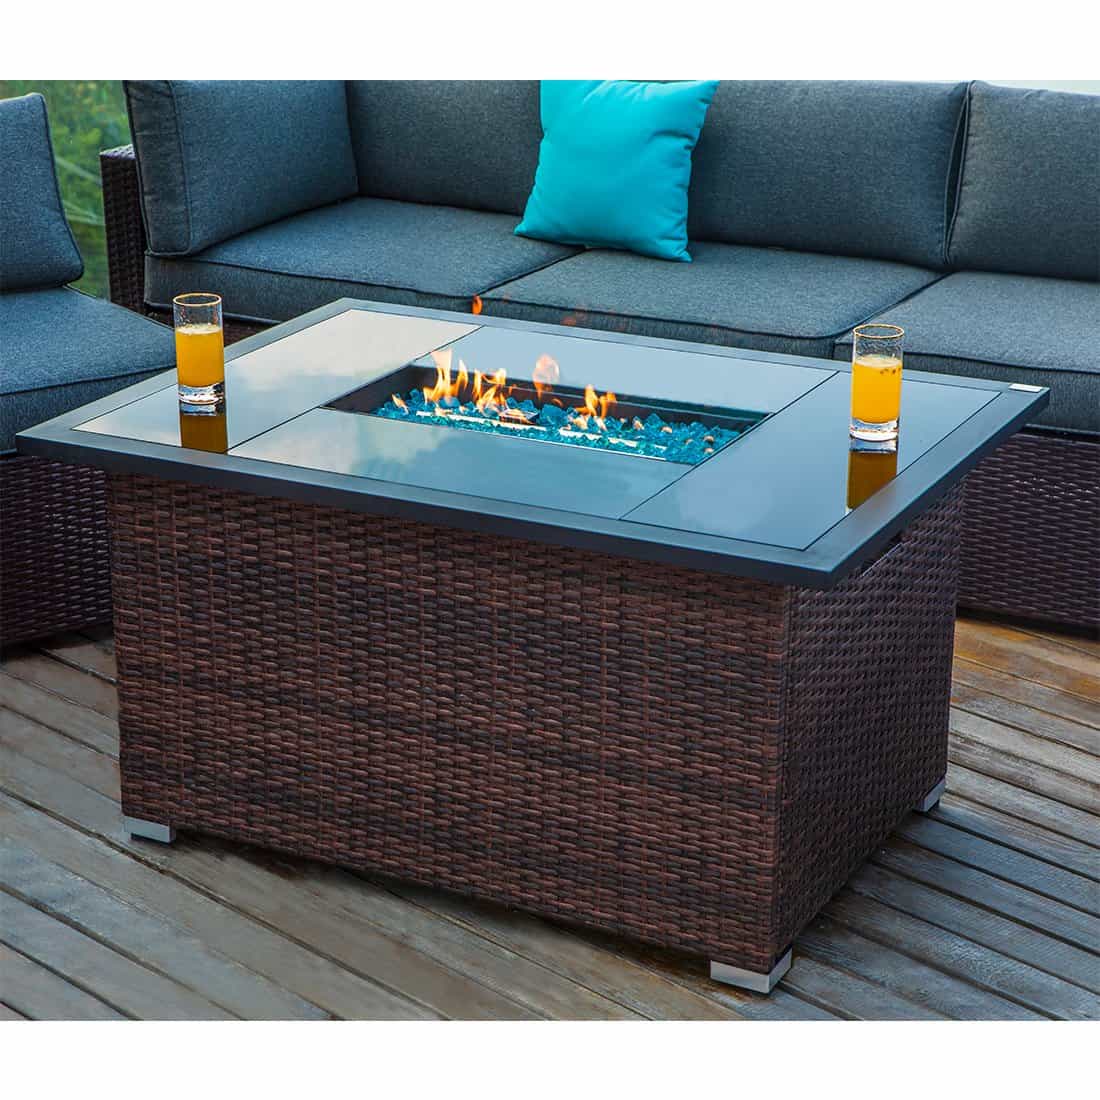 Pristine Wicker Rectangle Fire Pit with Propane Tank Inside